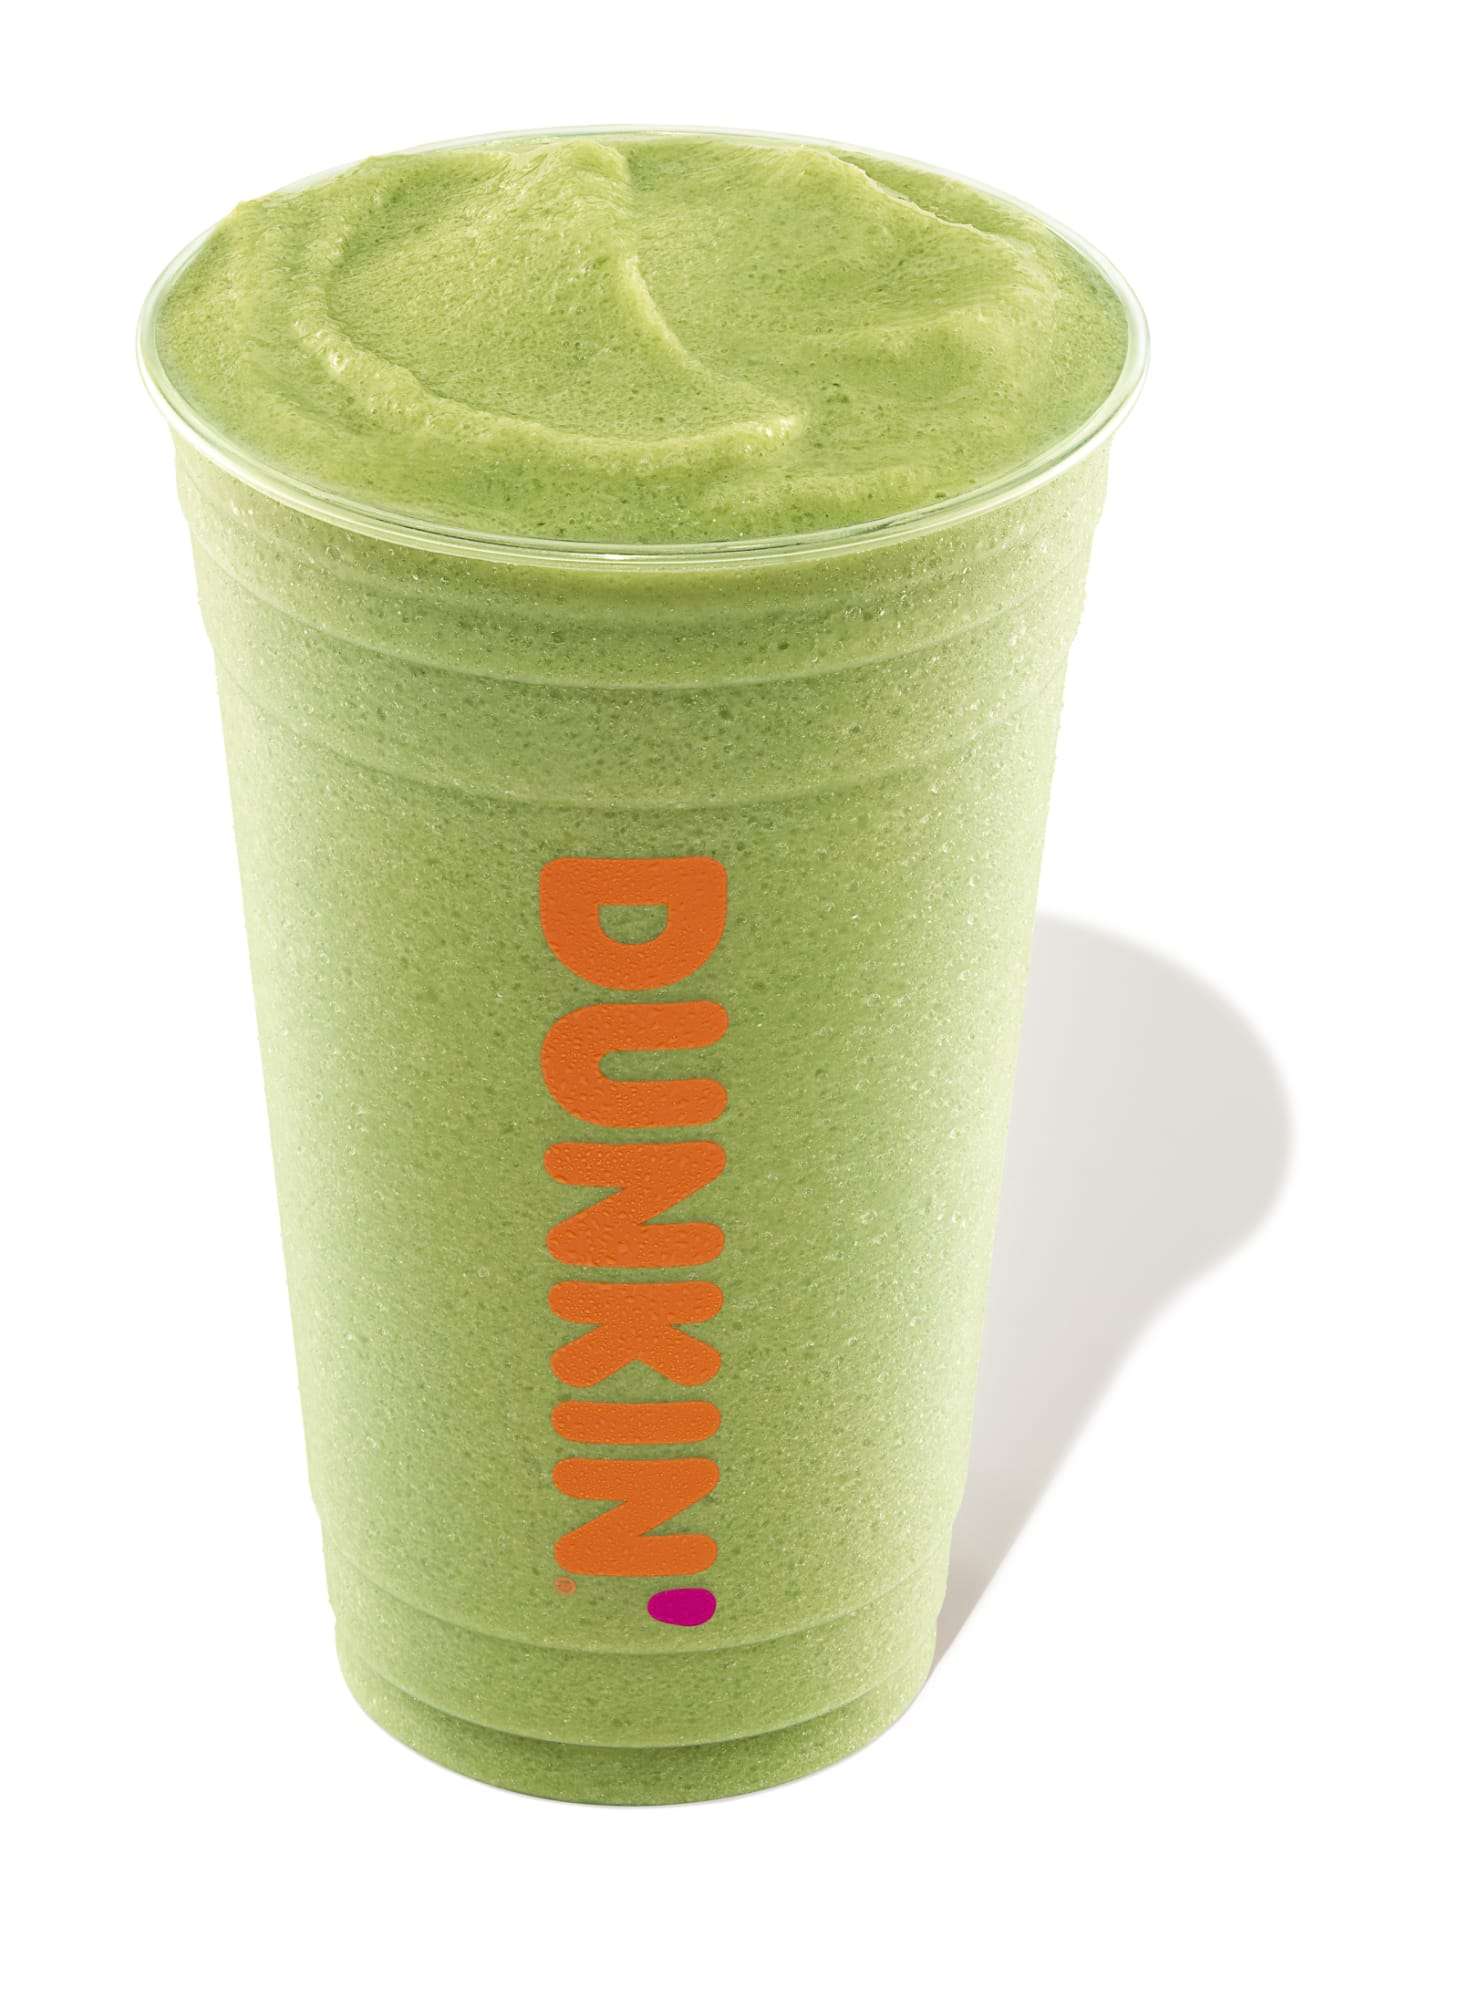 Dunkin Matcha Lattes, time to refresh and reset your day